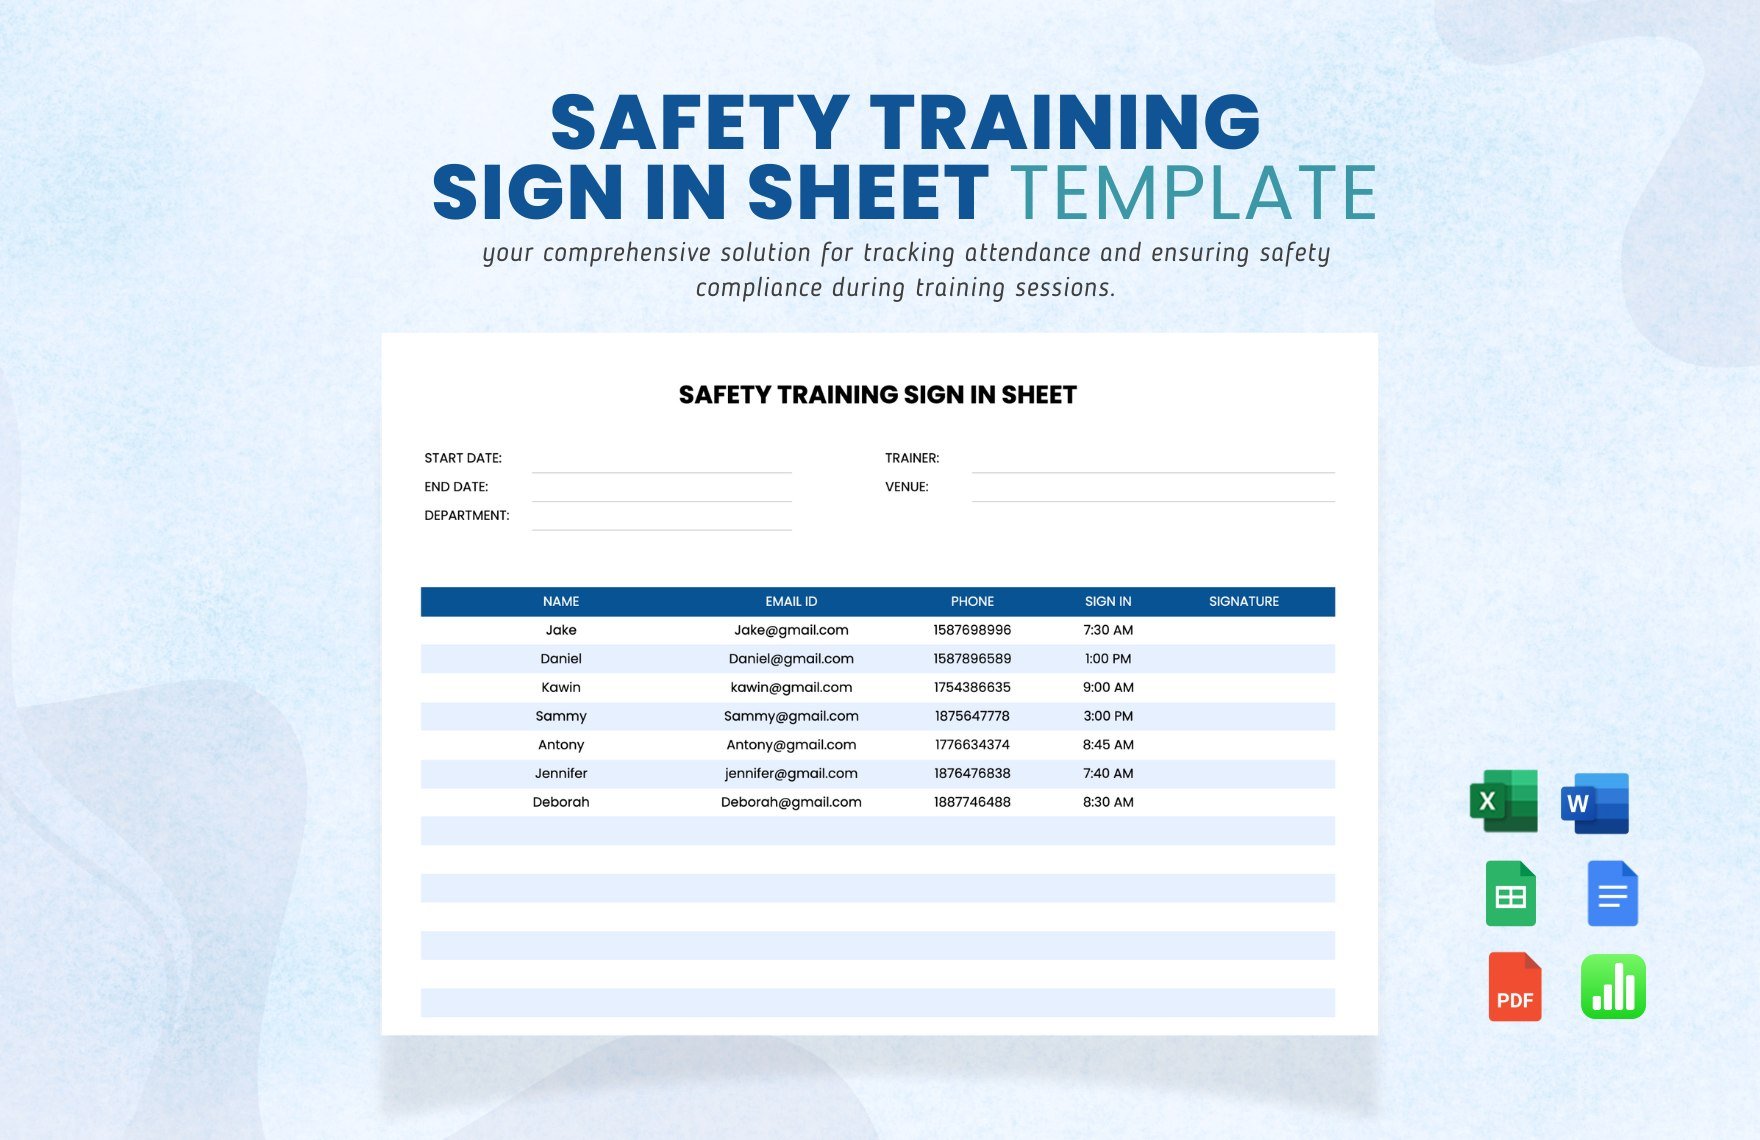 Safety Training Sign in Sheet Template in Word, Google Docs, Excel, PDF, Google Sheets, Apple Pages